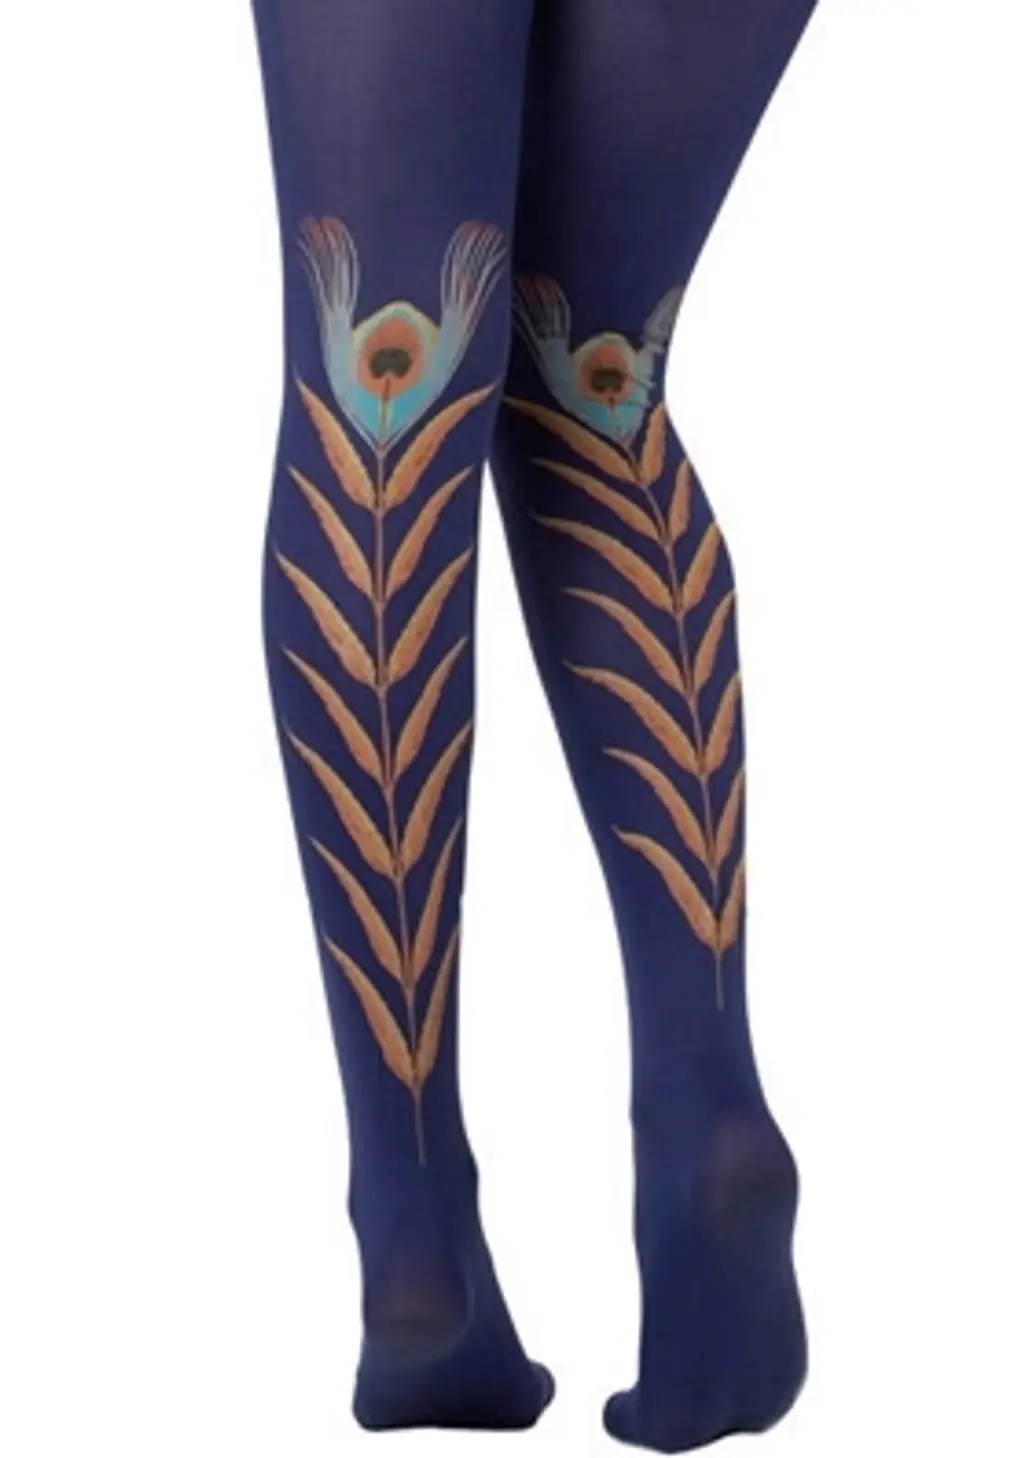 Look from London Indigo Peacock Feather Tights